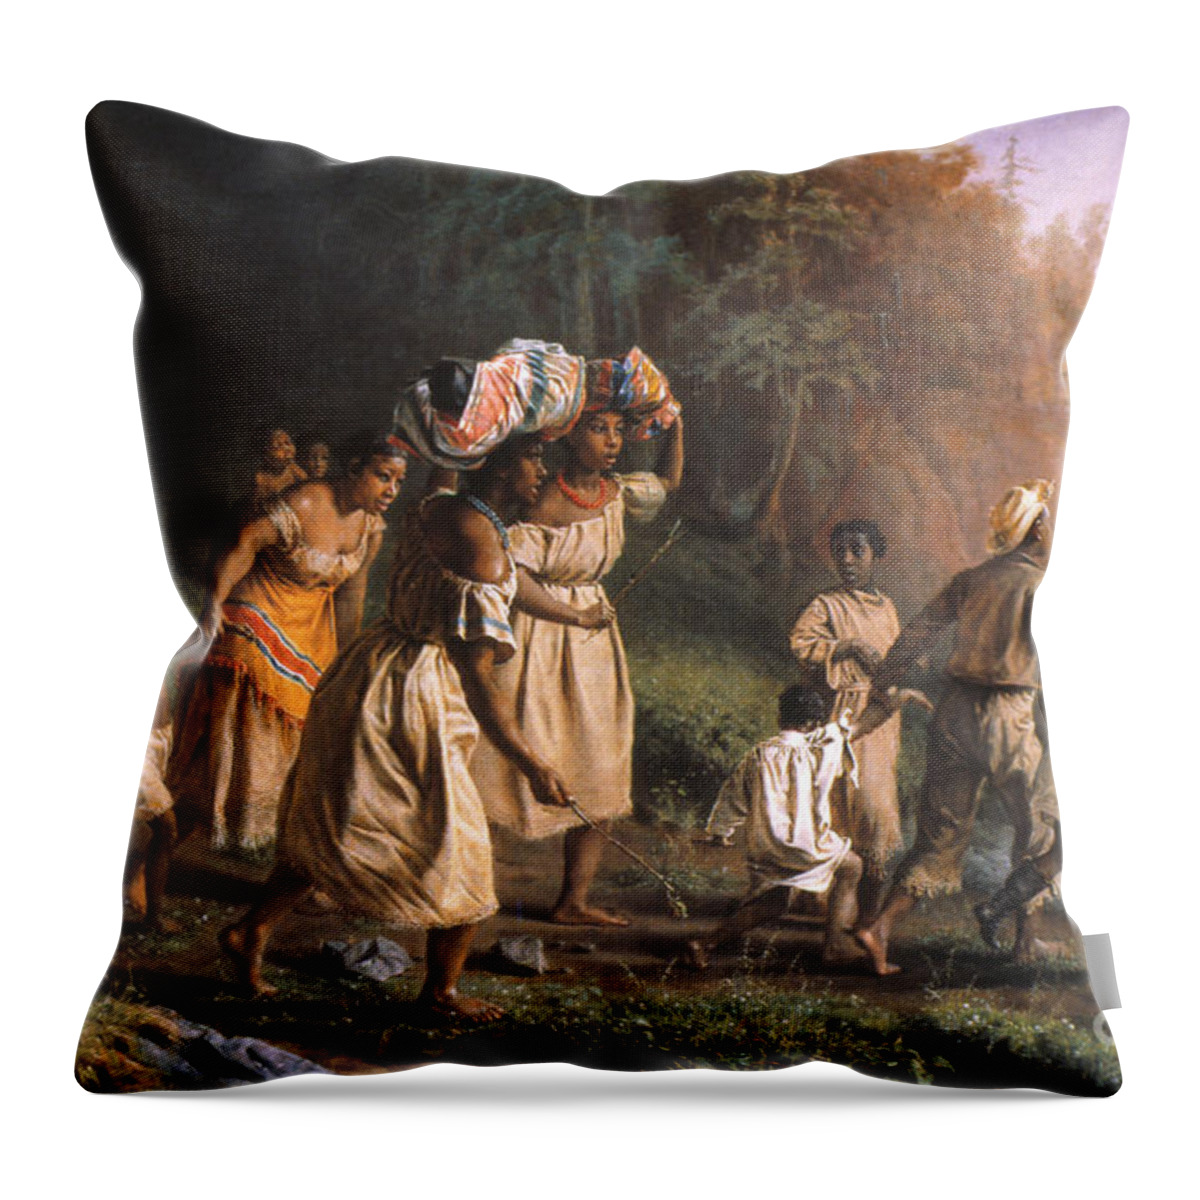 1867 Throw Pillow featuring the painting Fugitive Slaves, 1867 by Theodor Kaufmann